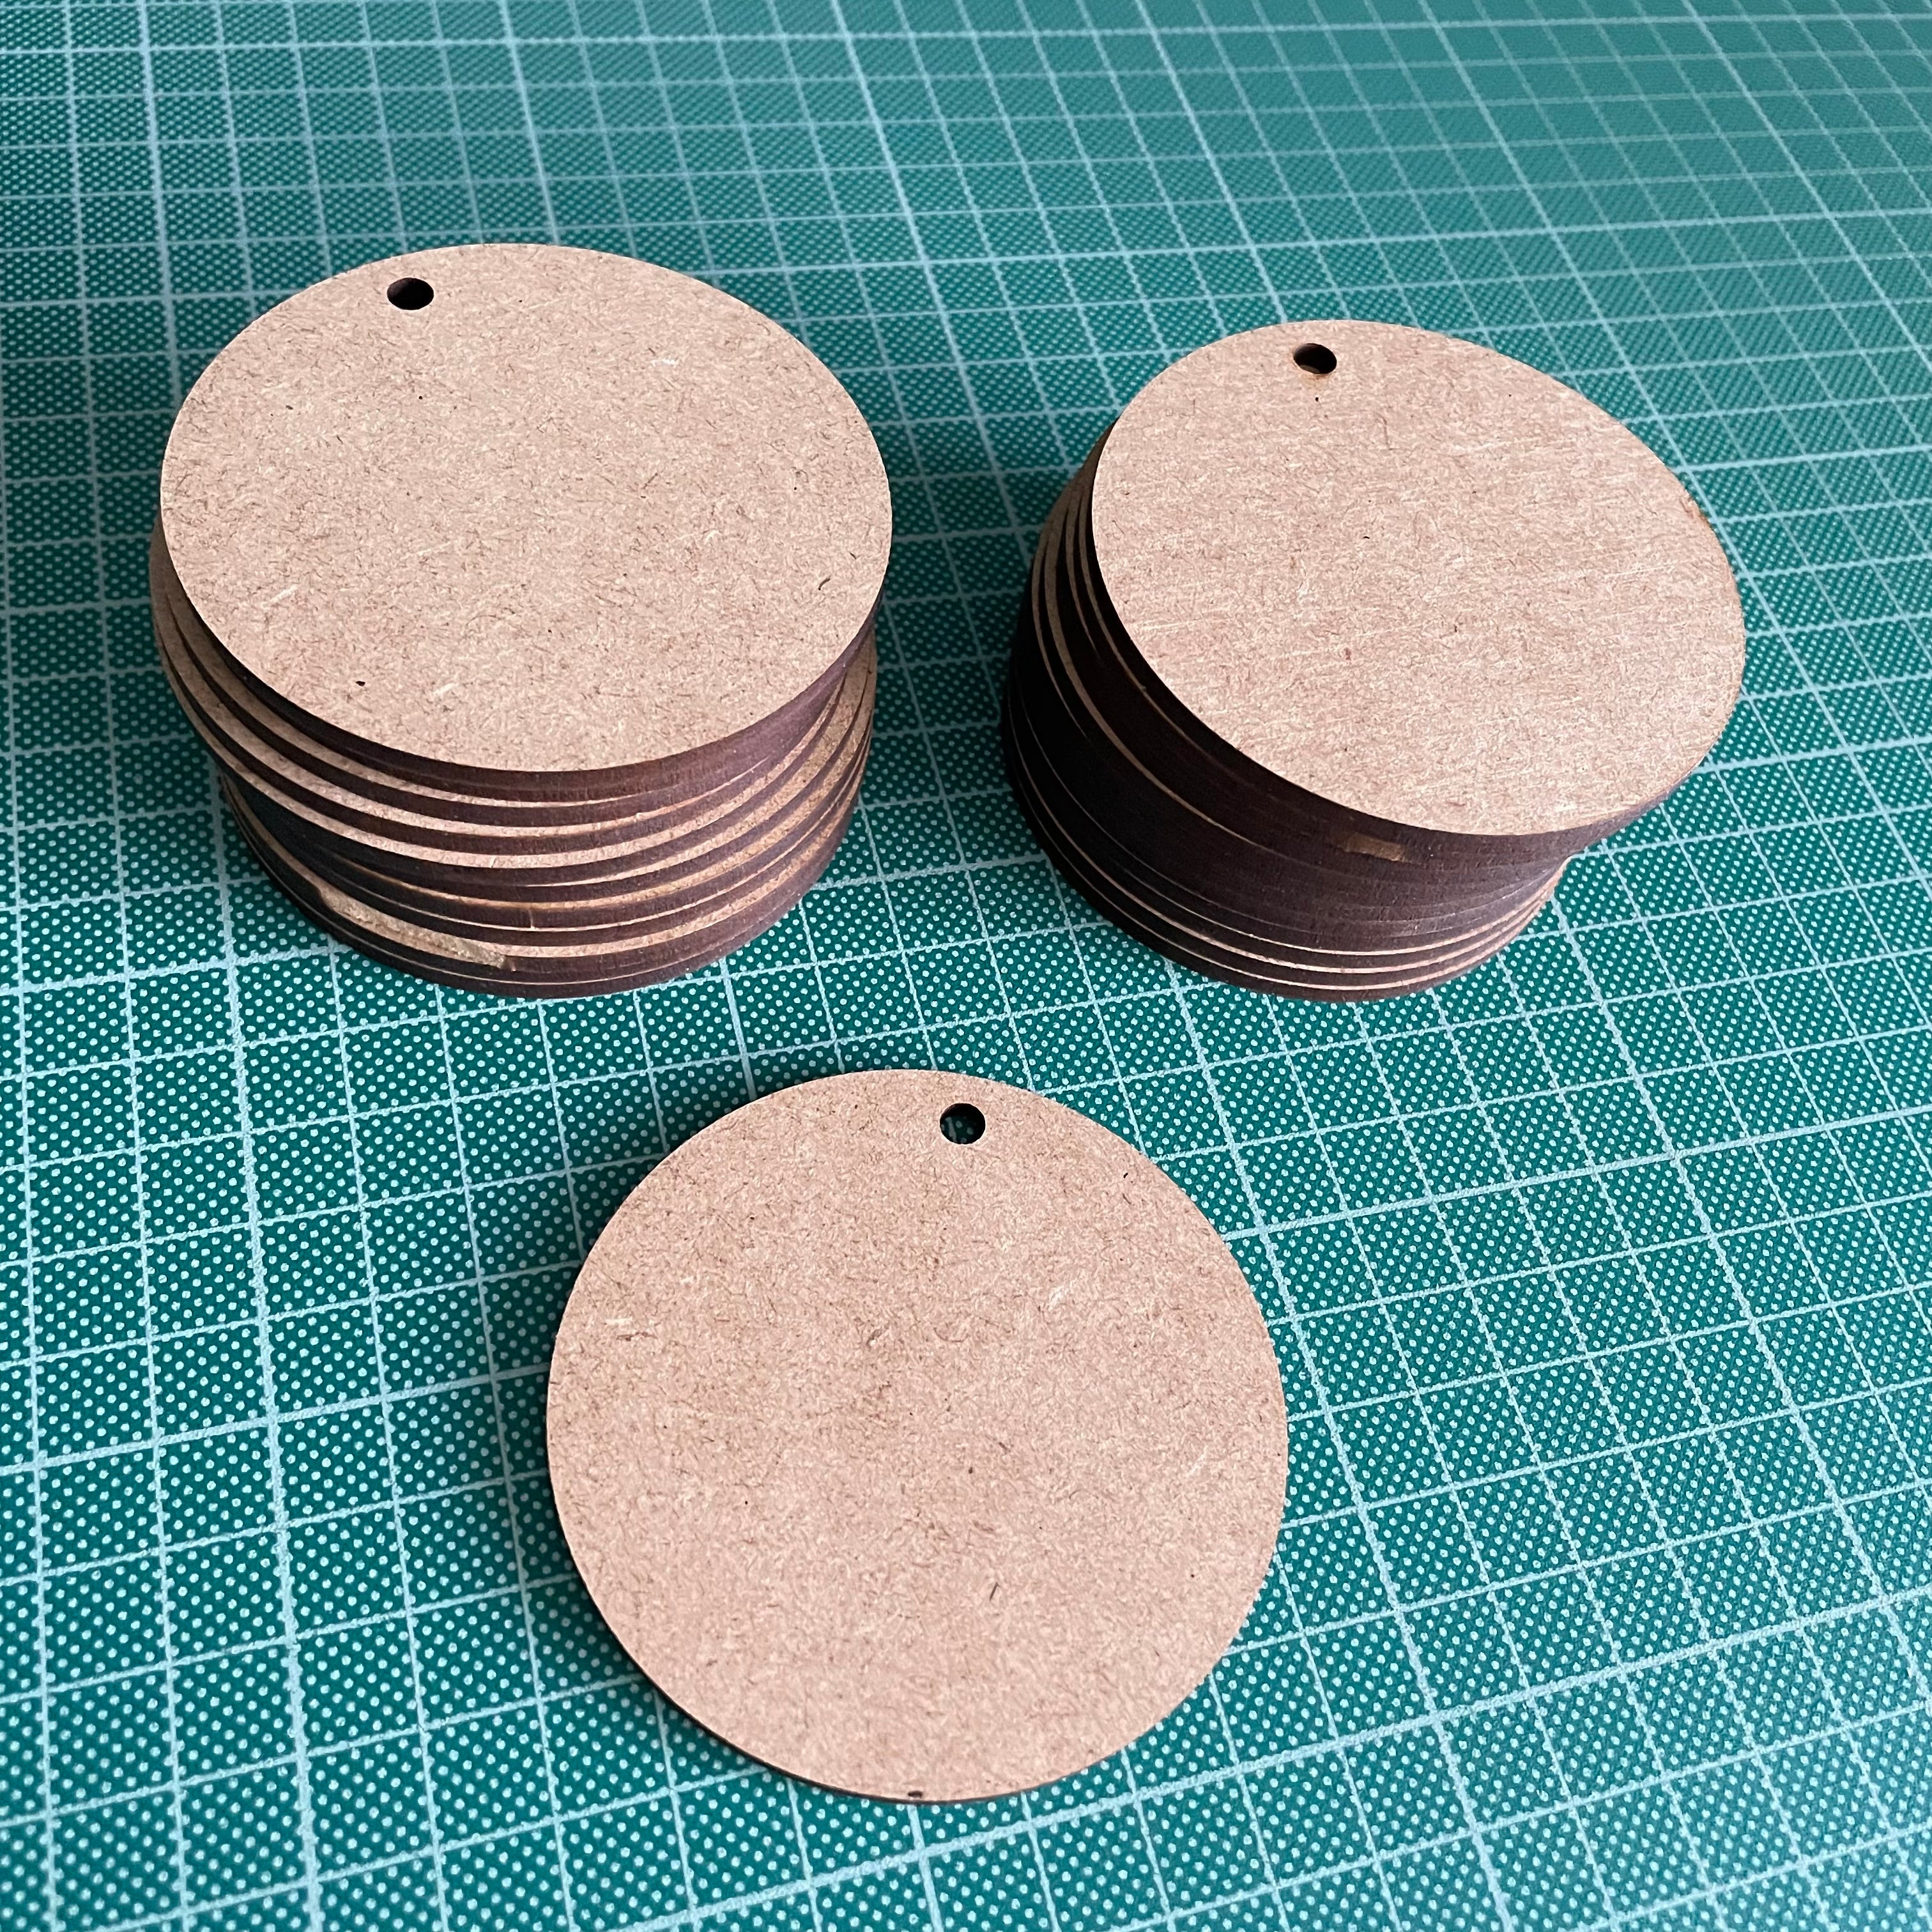 Printing Jig for 72mm Circle Disc Blanks - Roland LEF 12 Flatbed Printer (9 Spaces)